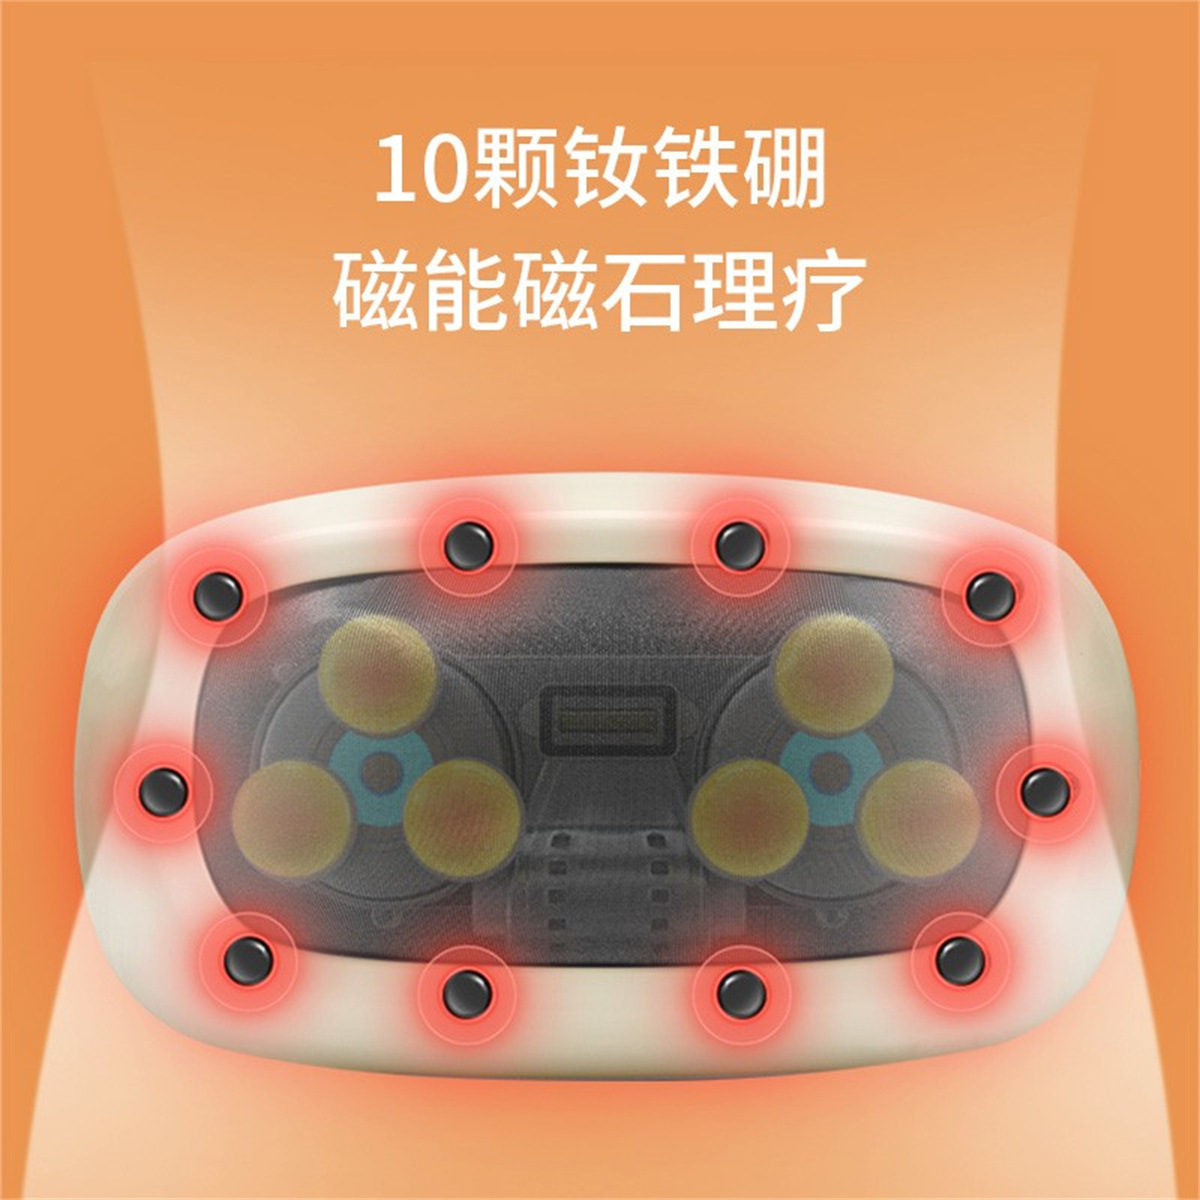 Ox Waist and Abdomen Massager Massage the Belly Magnet Automatic Hot Compress Abdominal Massager New Year Gift Wholesale